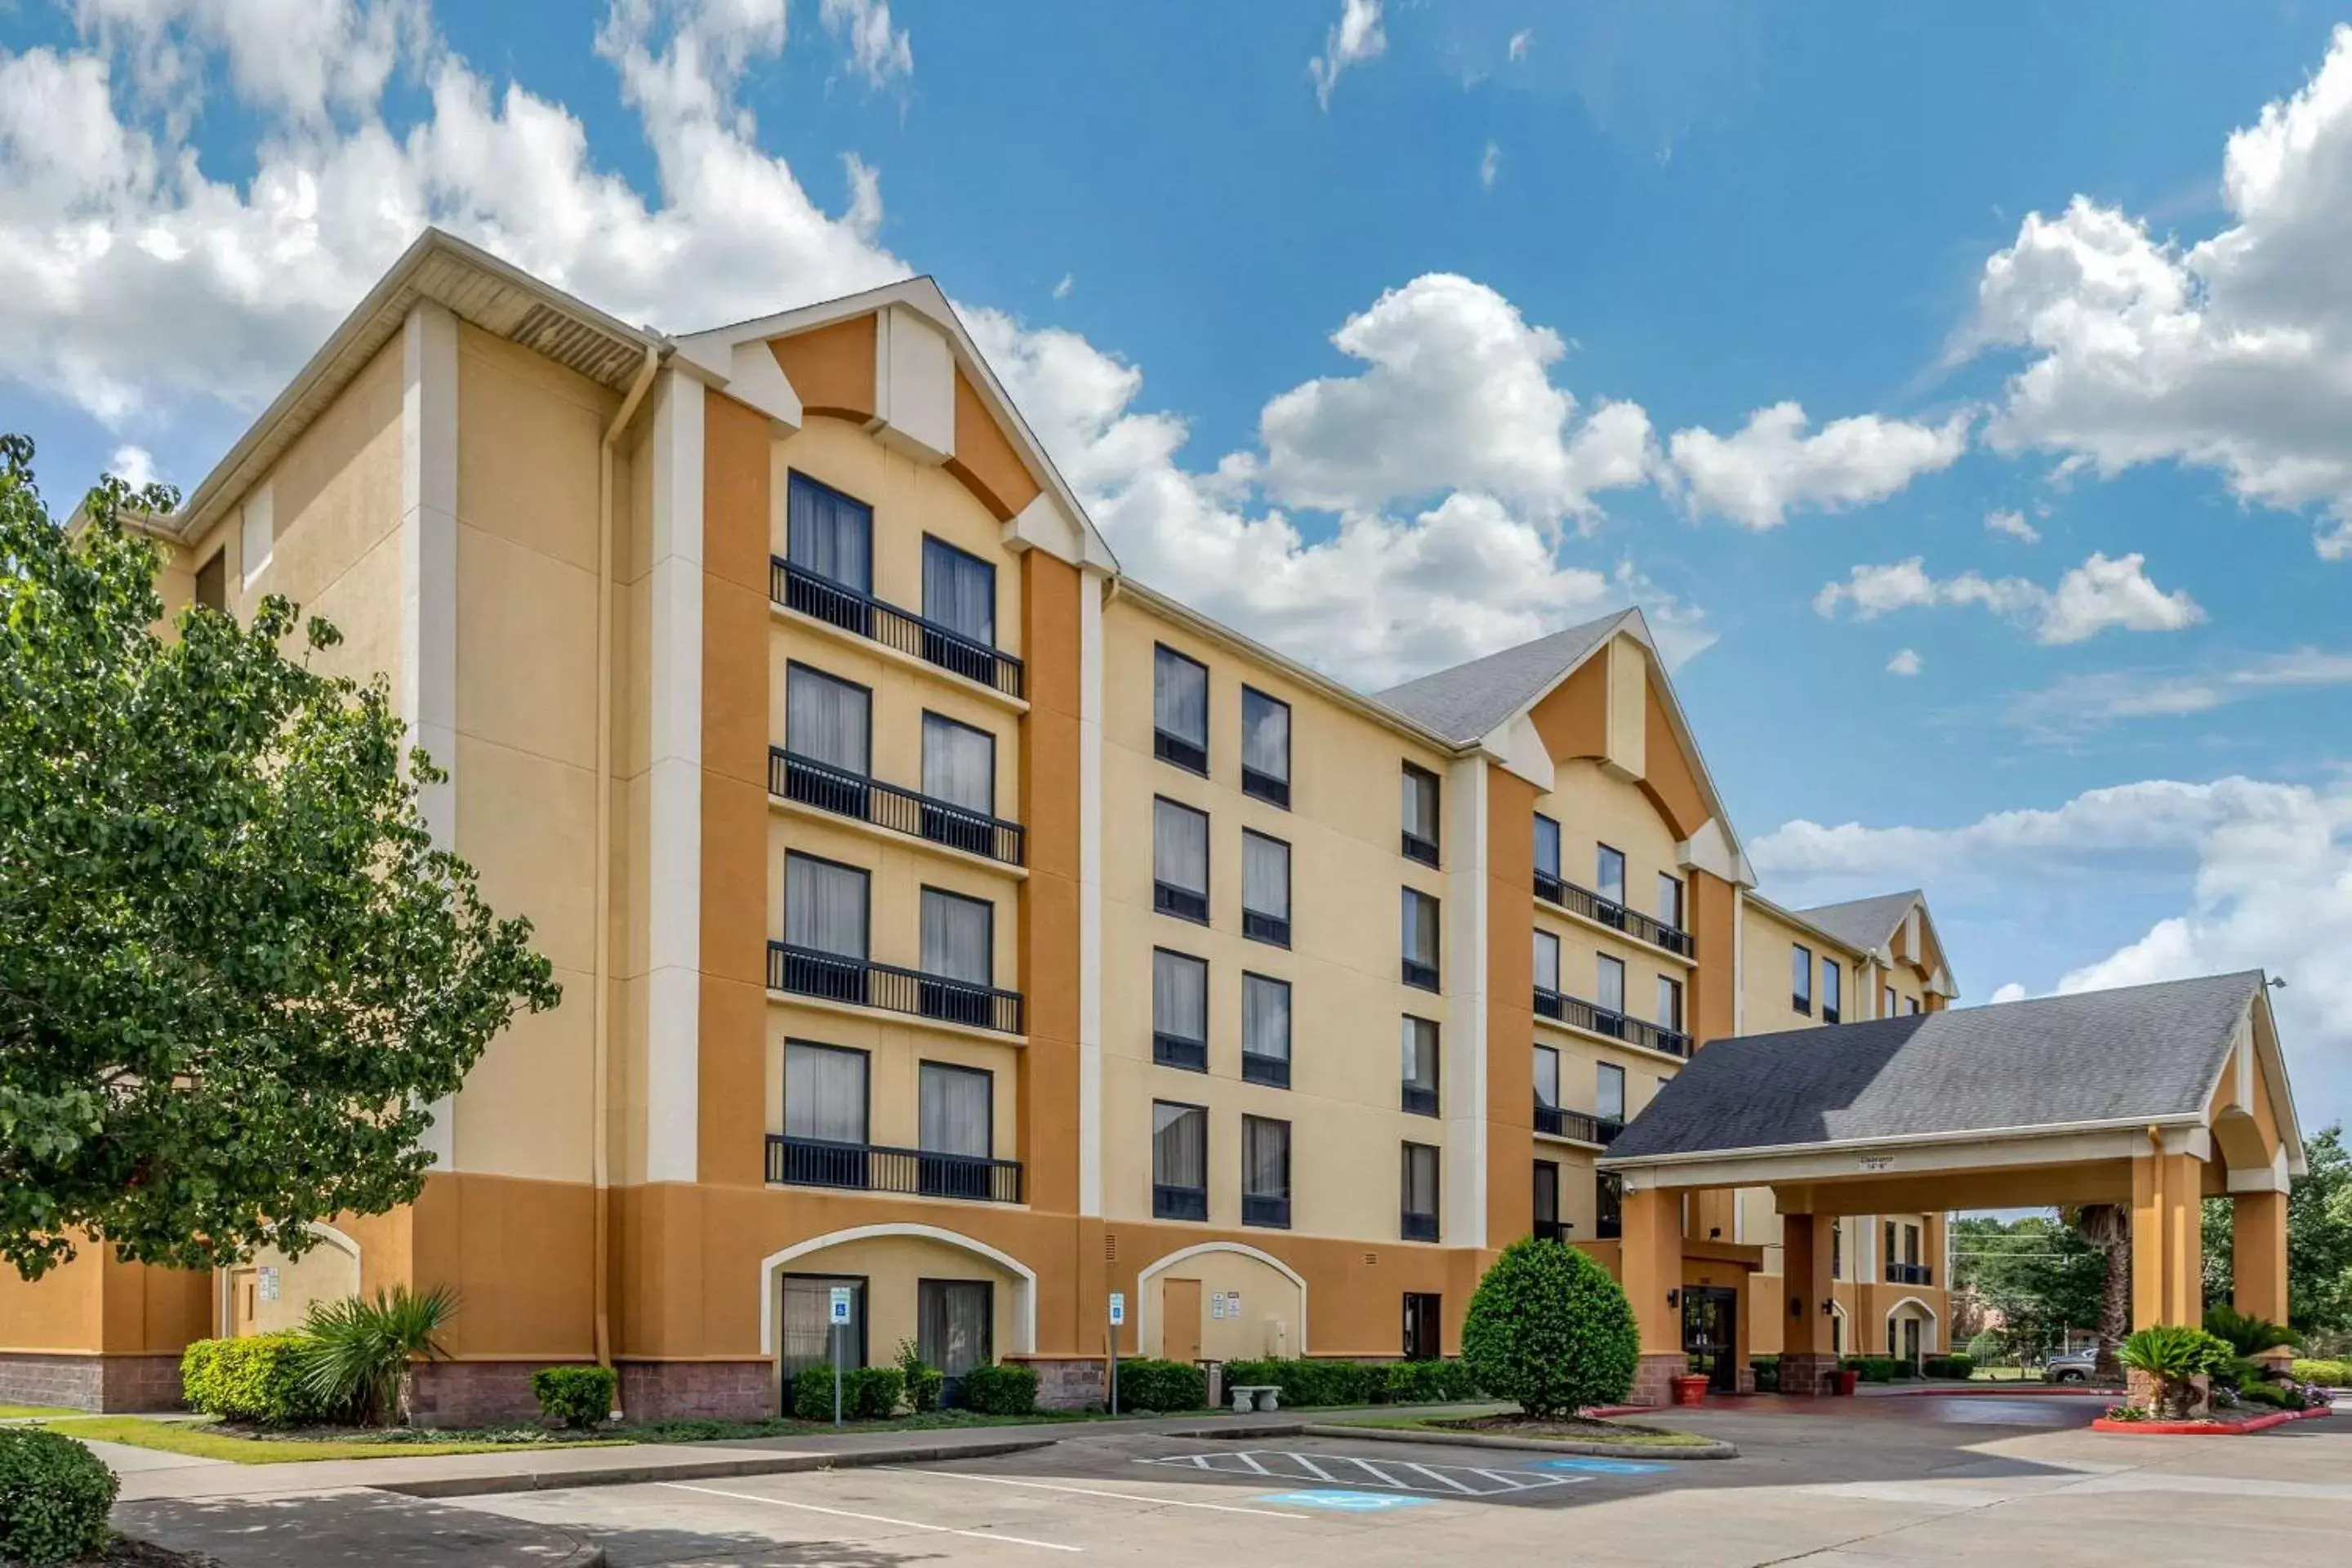 Property Building in Comfort Inn 290/NW